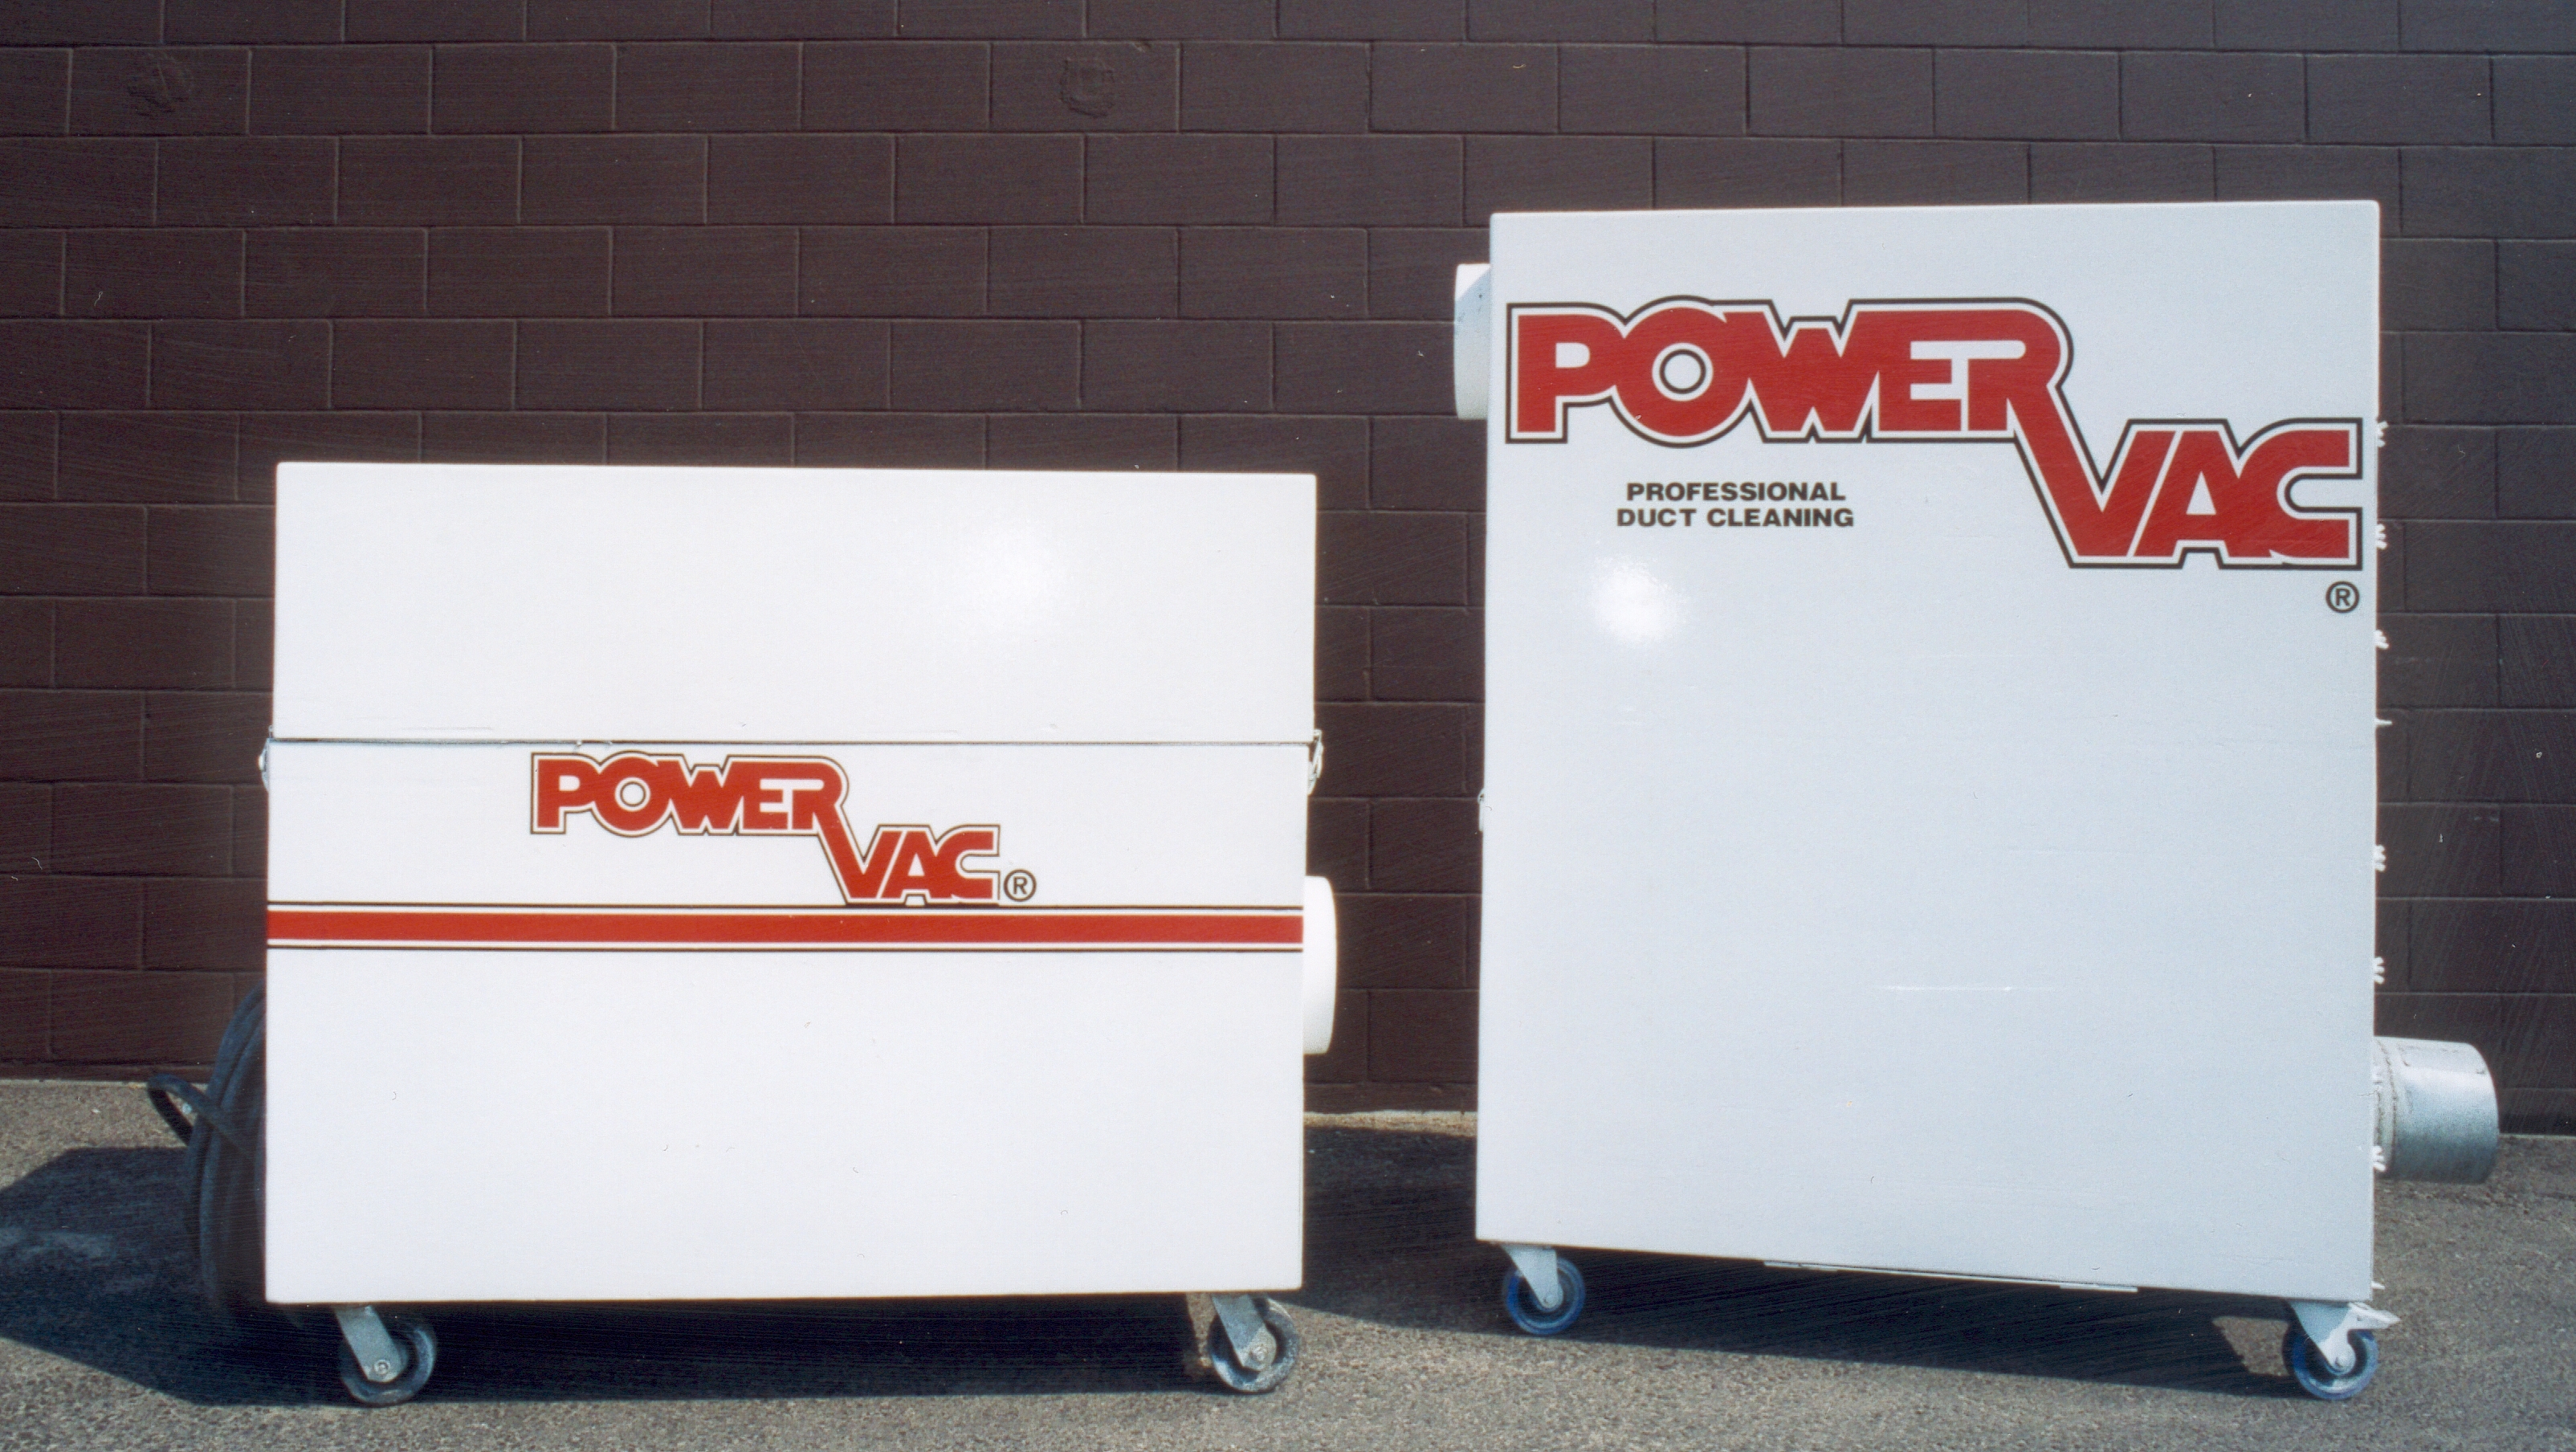 Power Vac Kitchener uses specialed Vaccum units for commerciald and industrial duct cleaning